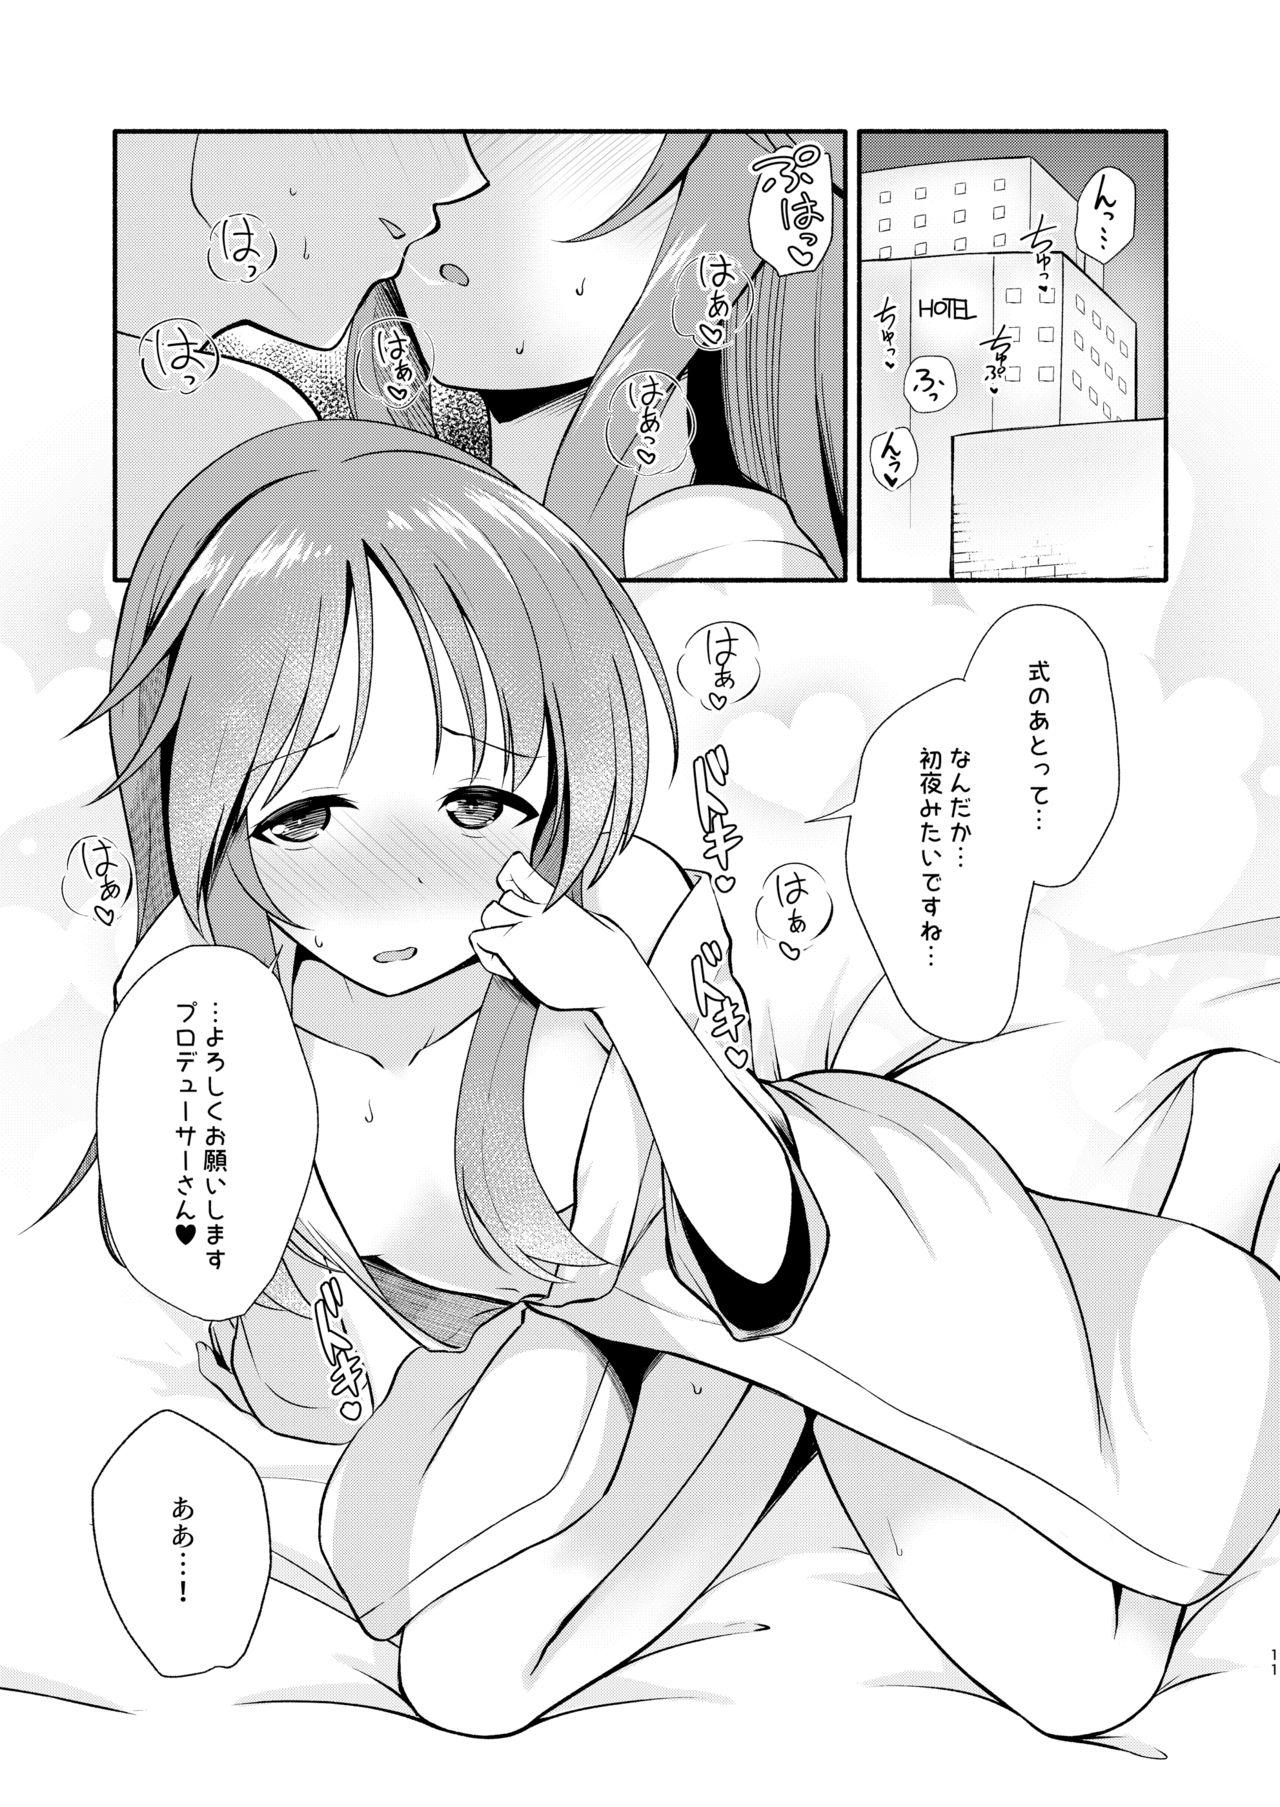 Naked Aiko Myu Endless 8 - The idolmaster Little - Page 11